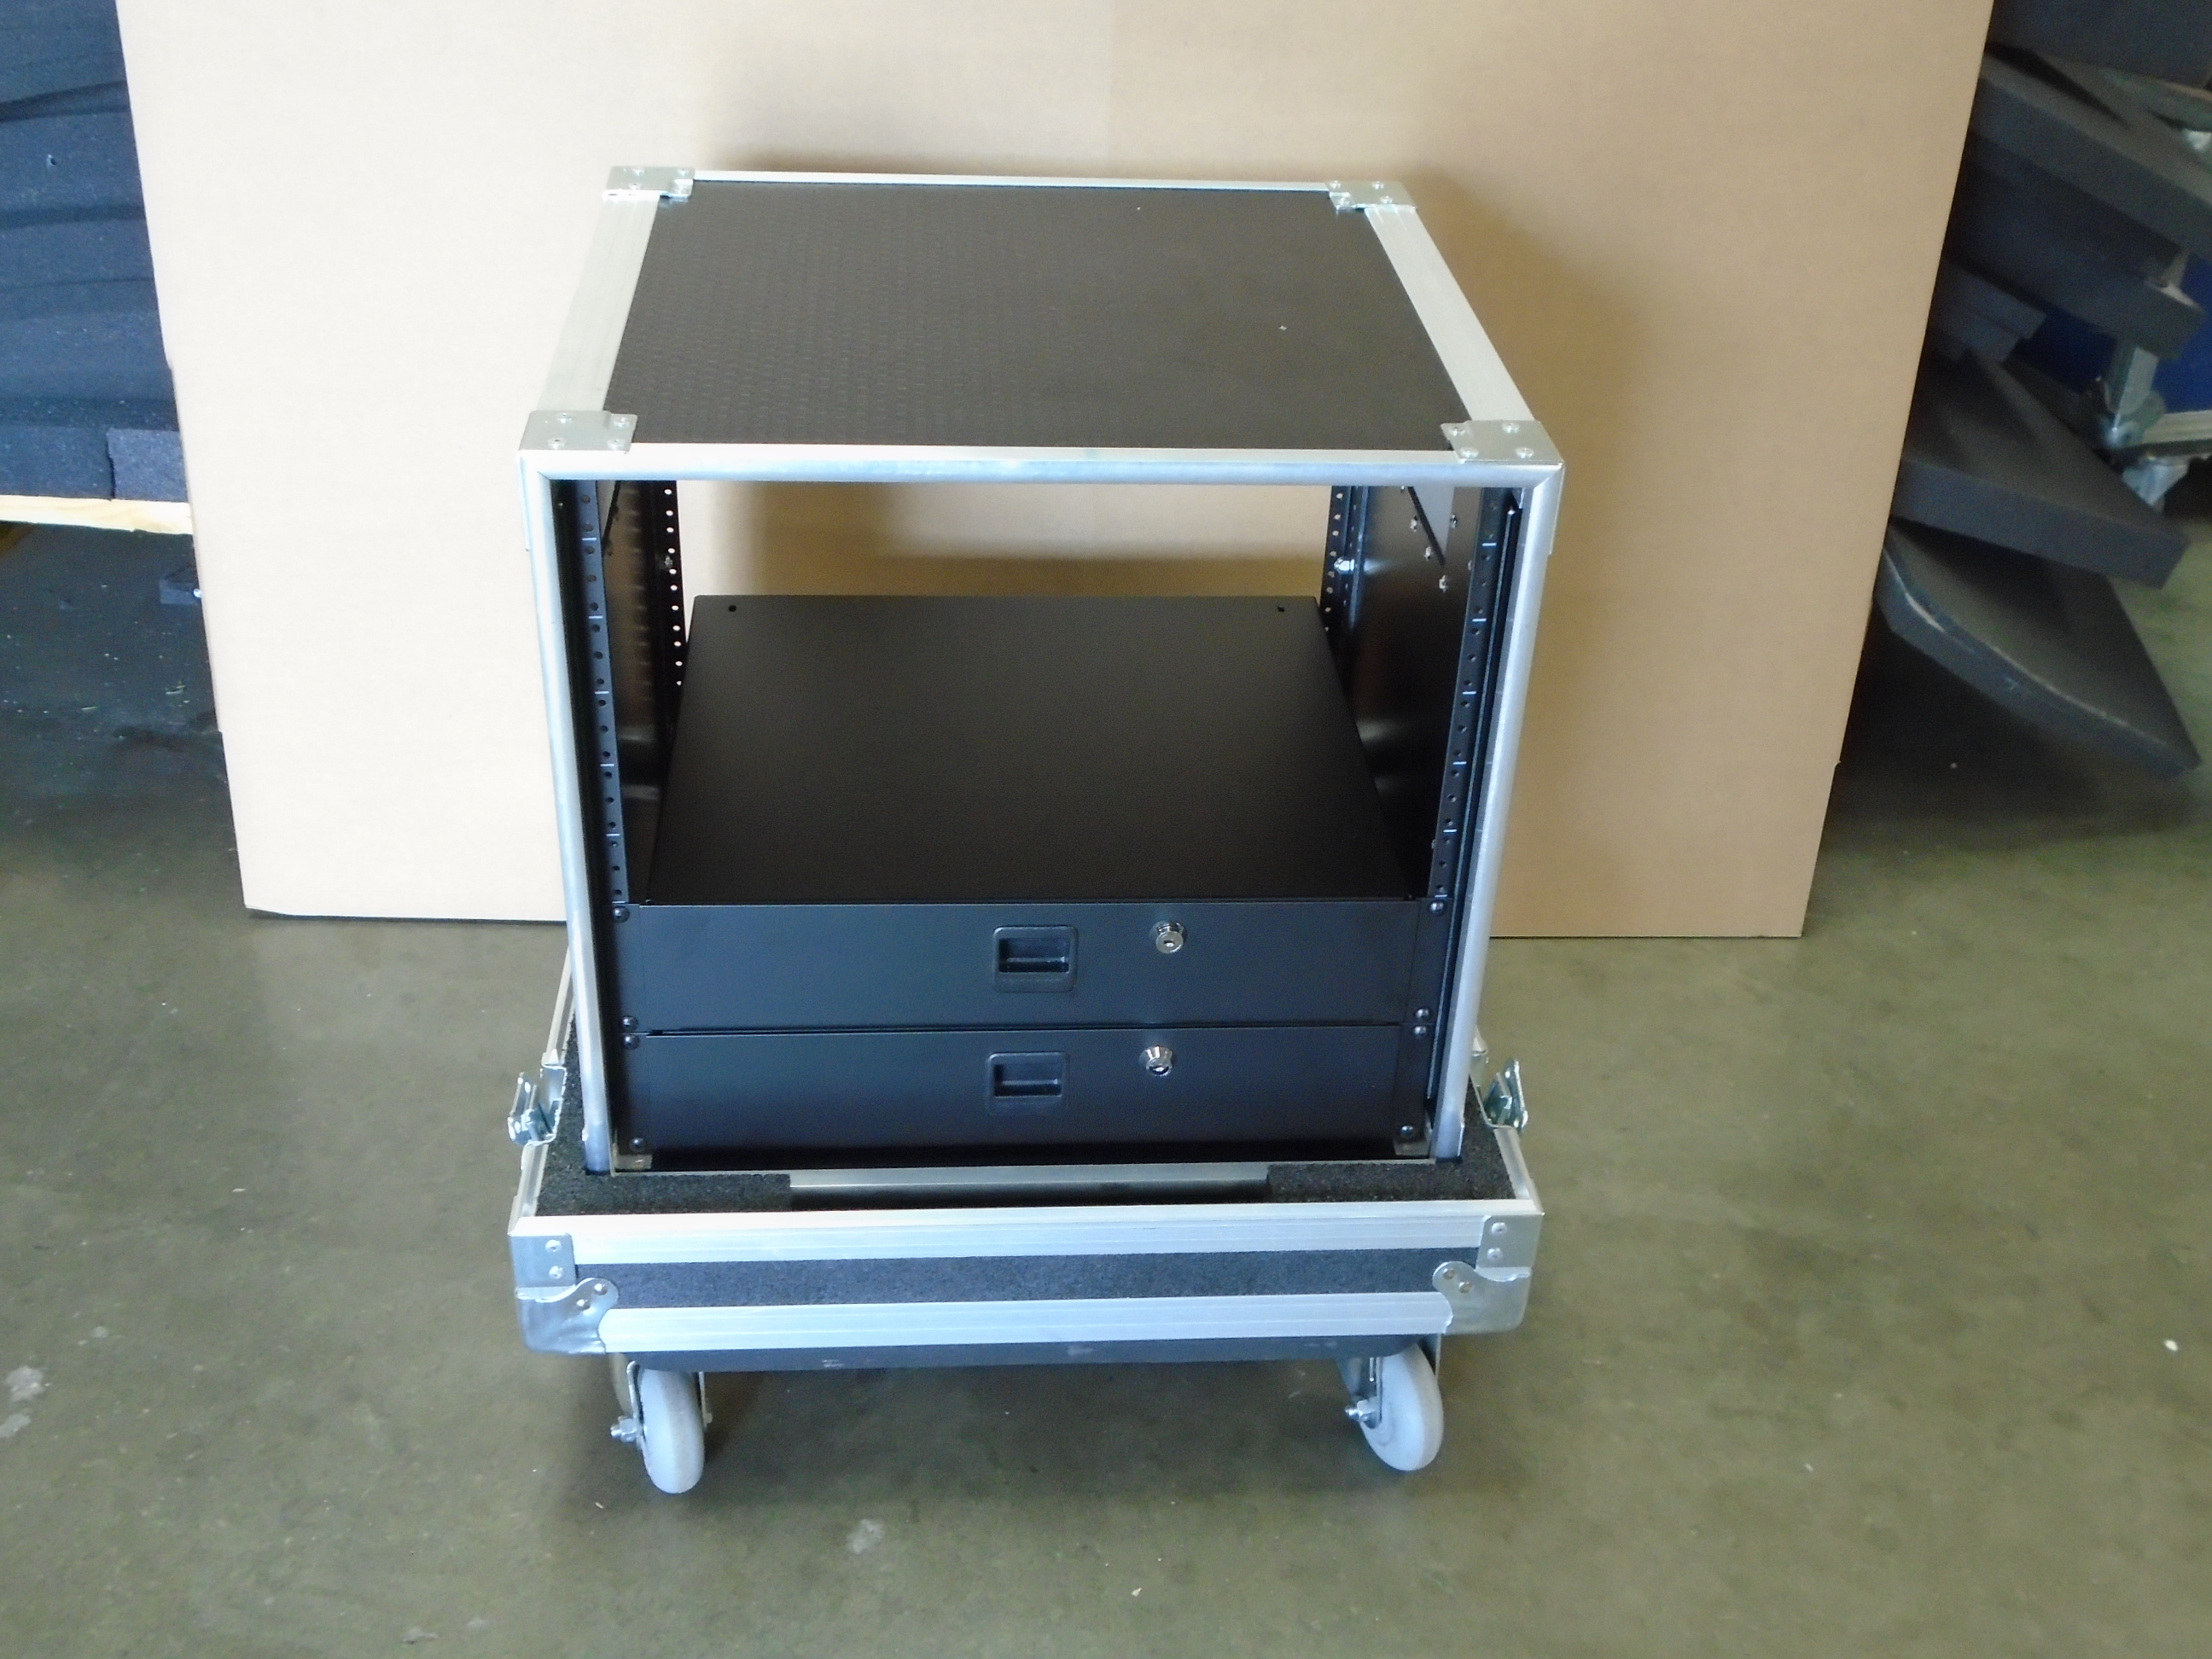 Print # 7892 - Custom Road Case for Removable 10-RU Standard Rack for Shure PSM 1000 Personal Monitor System By Nelson Case Corp